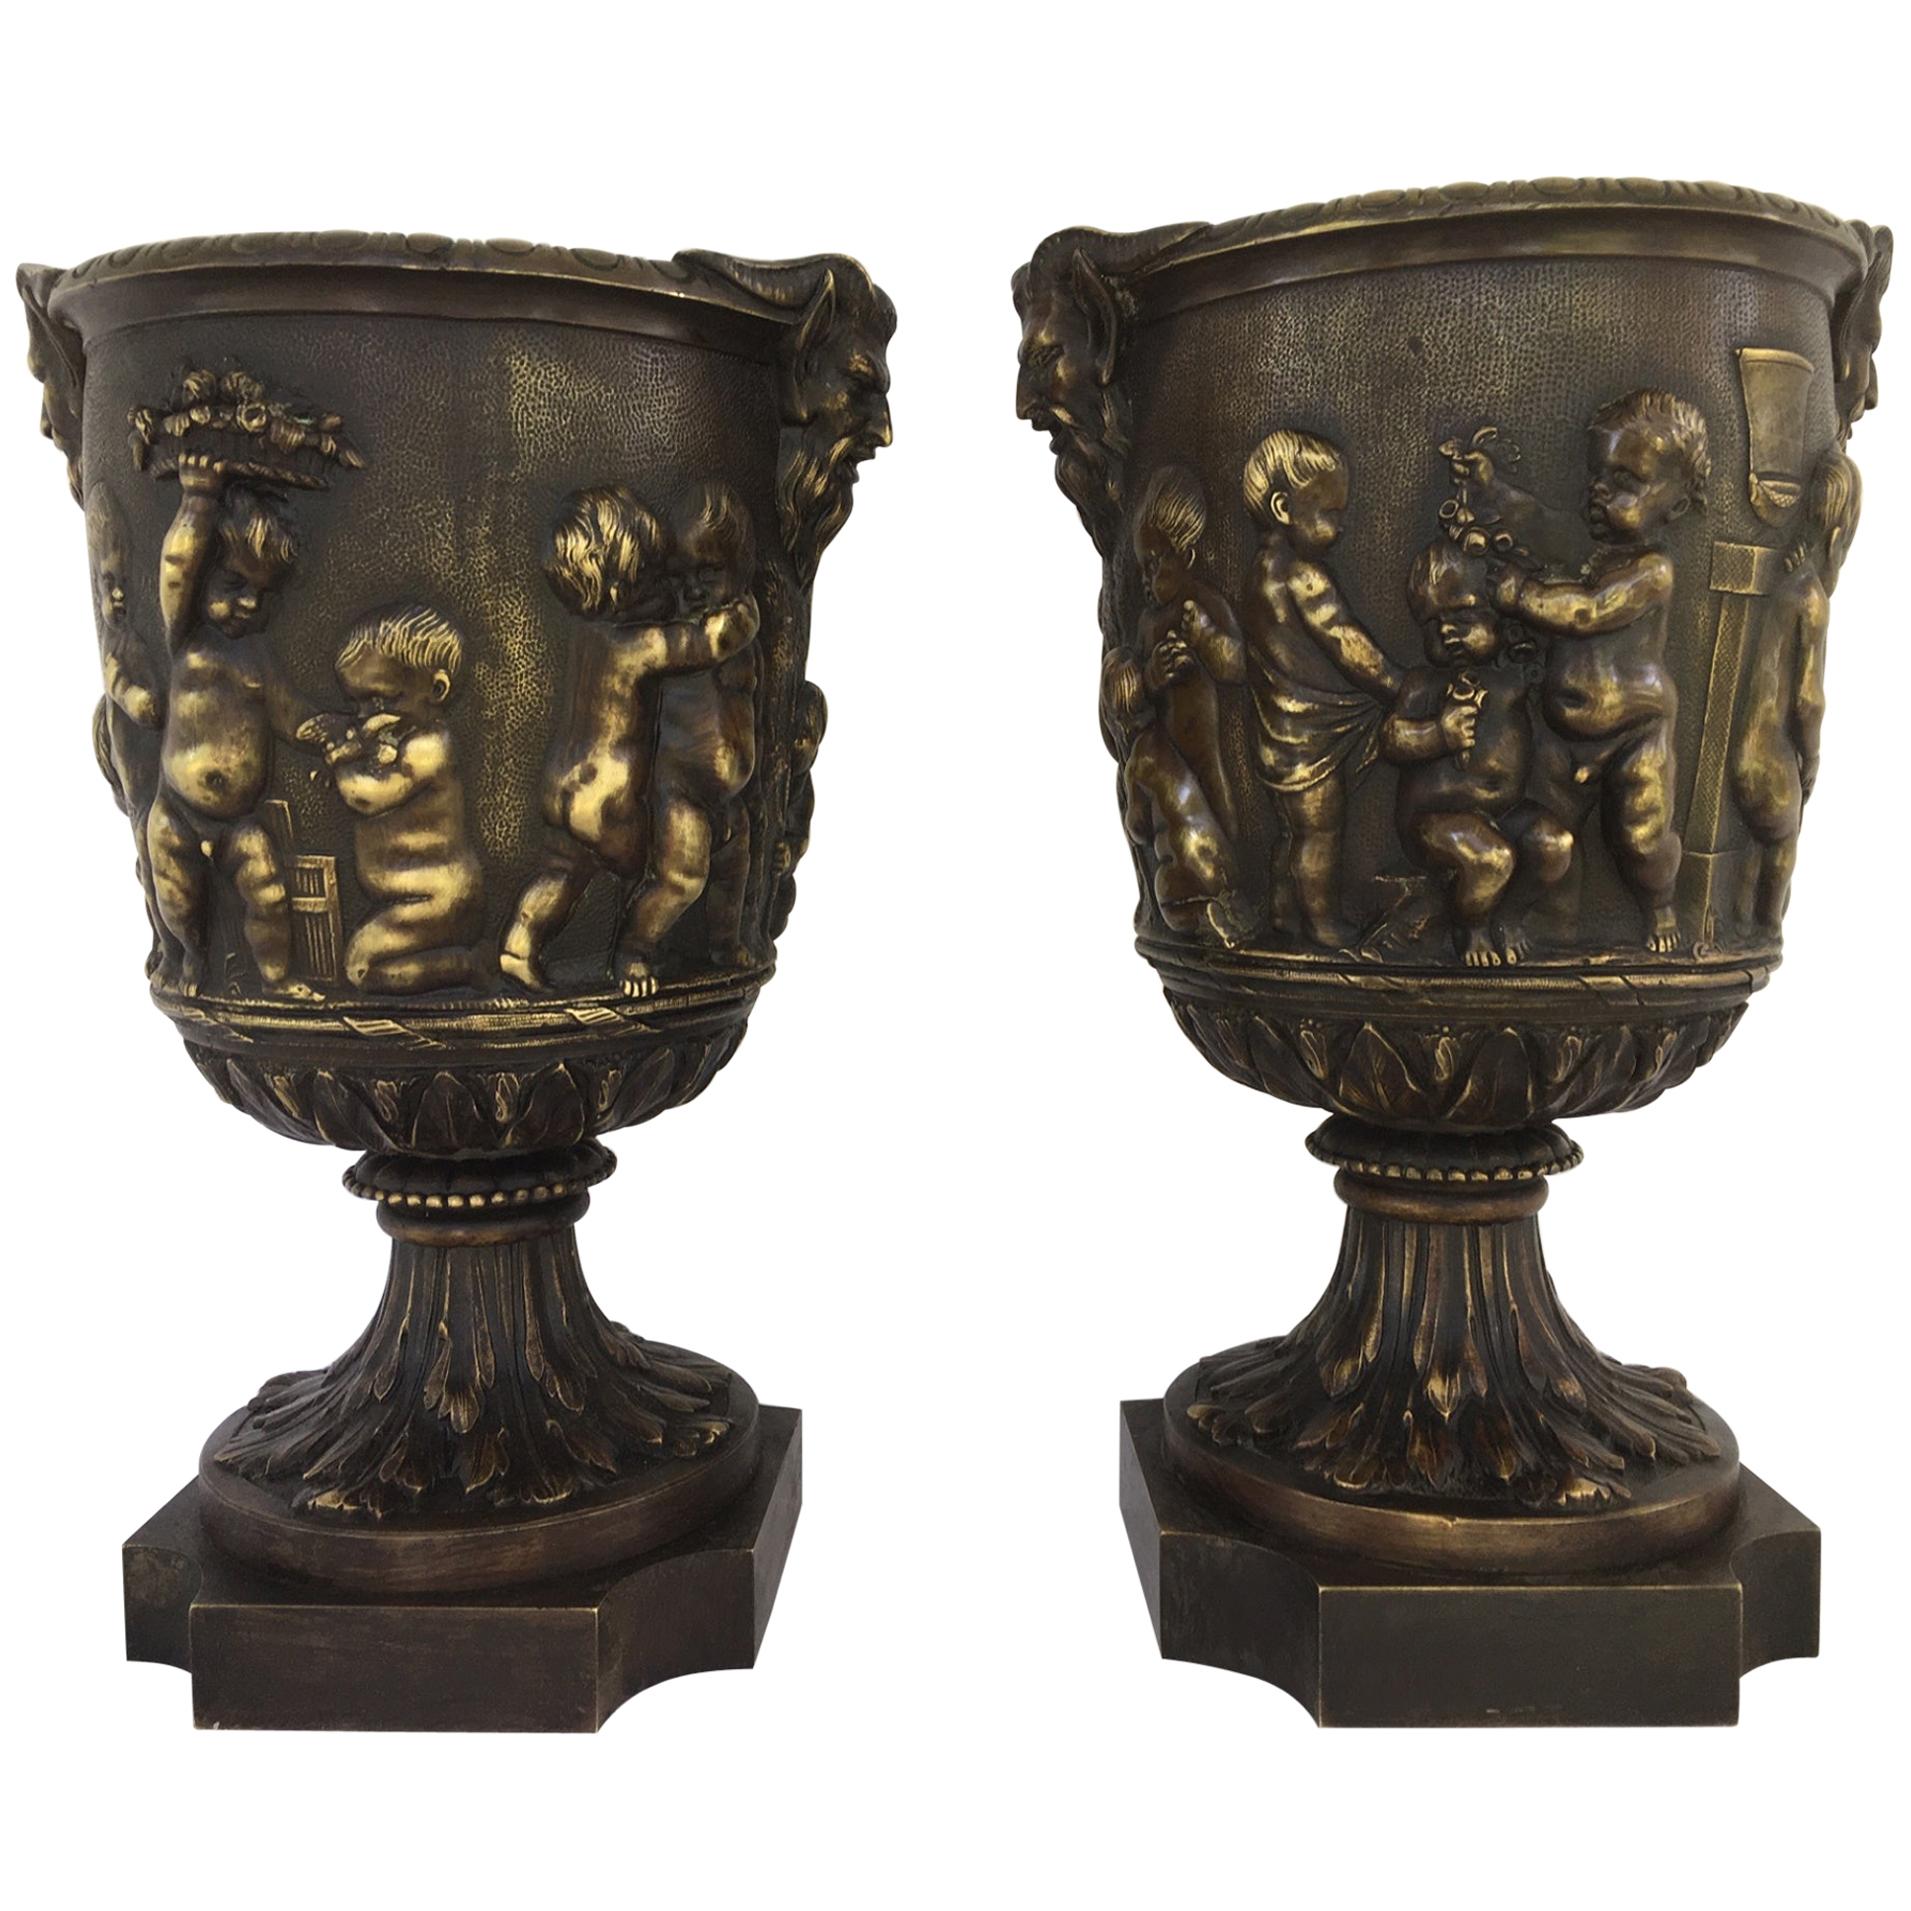 Pair of 19th Century French Bronze Urns after Clodion